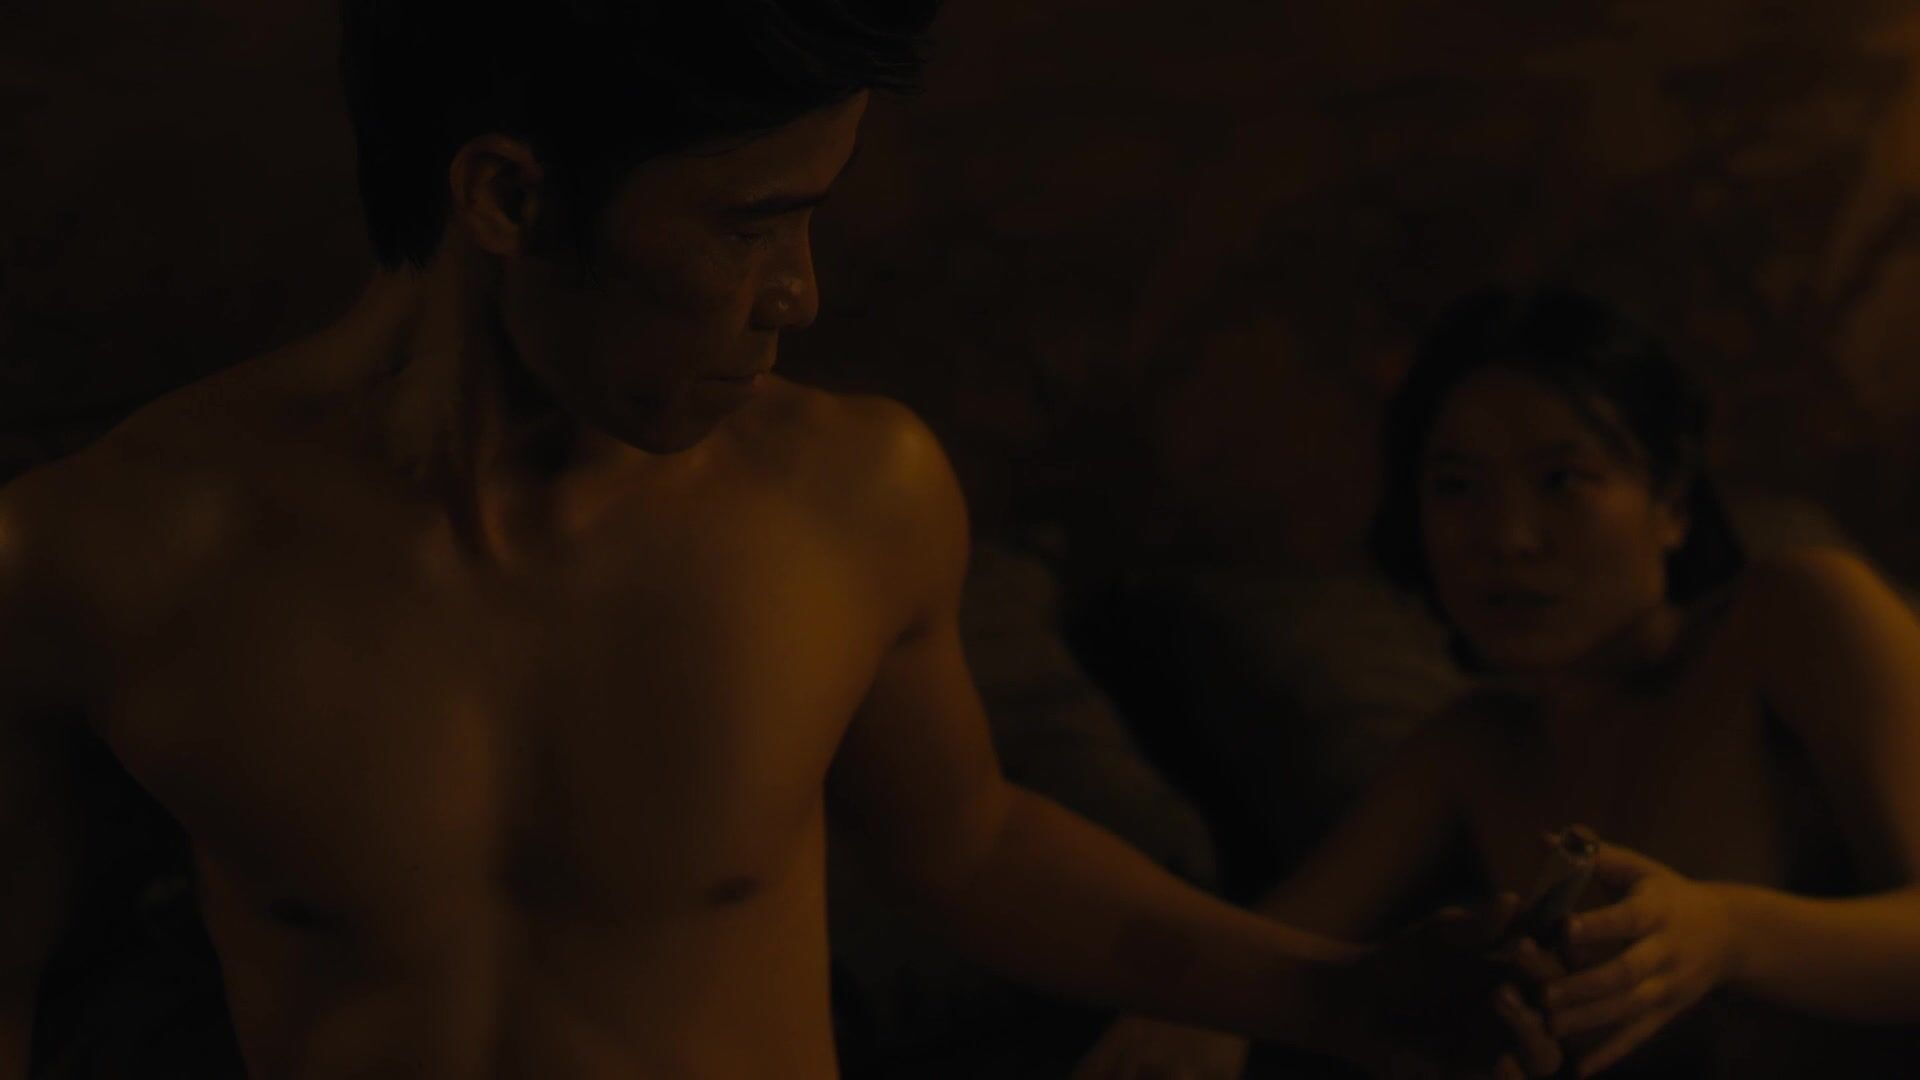 eFappy Hanni Choi is sexy to look at in Warrior s01e07 (2019) GreekSex